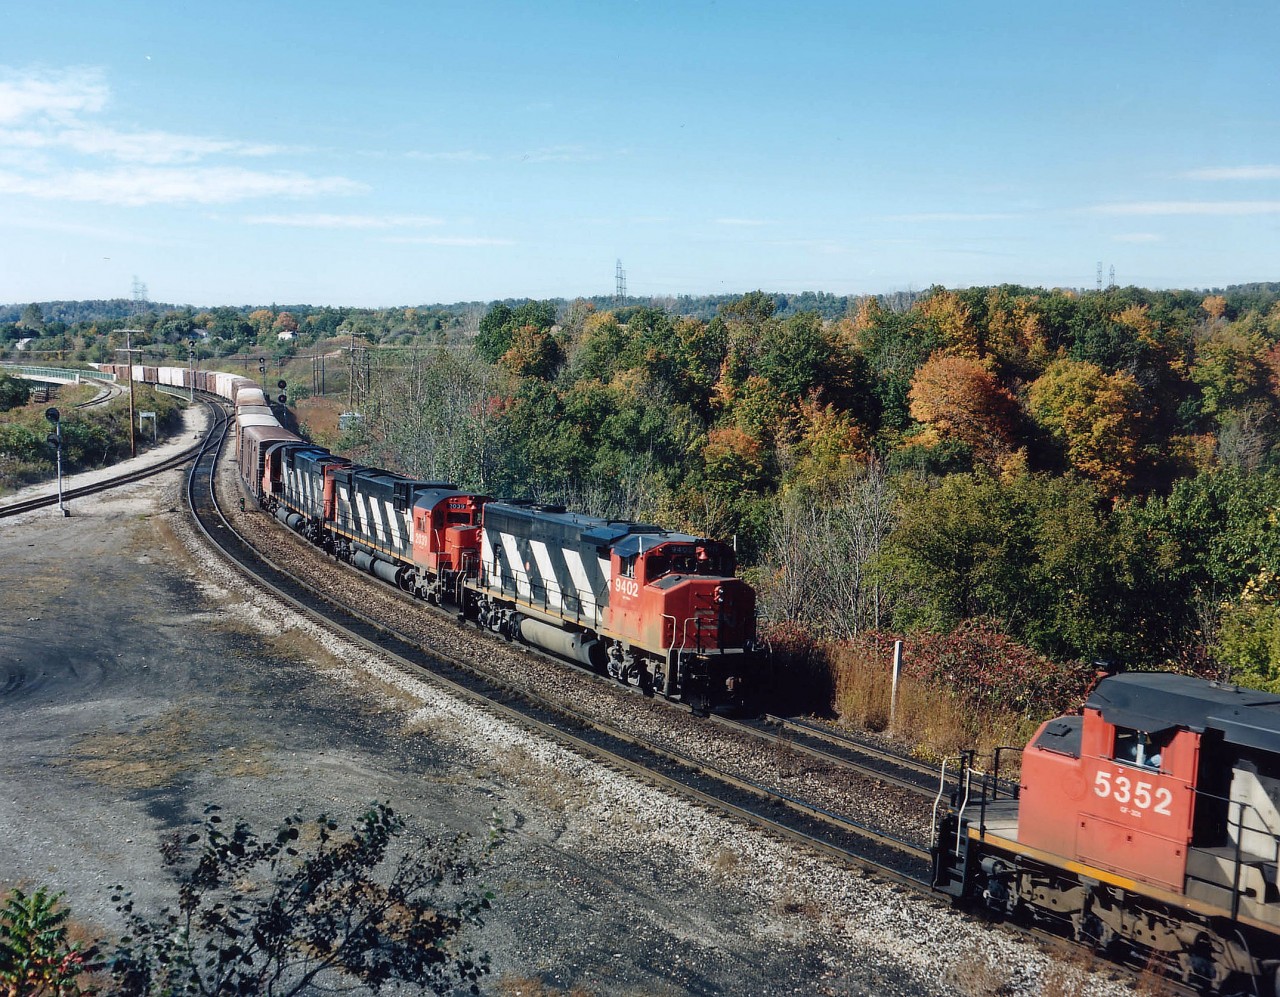 Longer trains and fewer of them results in meets being rather infrequent compared to days past. Here we see westbound CN 5352 about to climb the long grade west of Bayview as an eastbound, with CN 9402, 2039 and 20xx, complete with white "Extra" flags, approaches the Jct at Bayview on a nice fall afternoon. Image shot with the ol' Speed Graphic and colour sheet film.